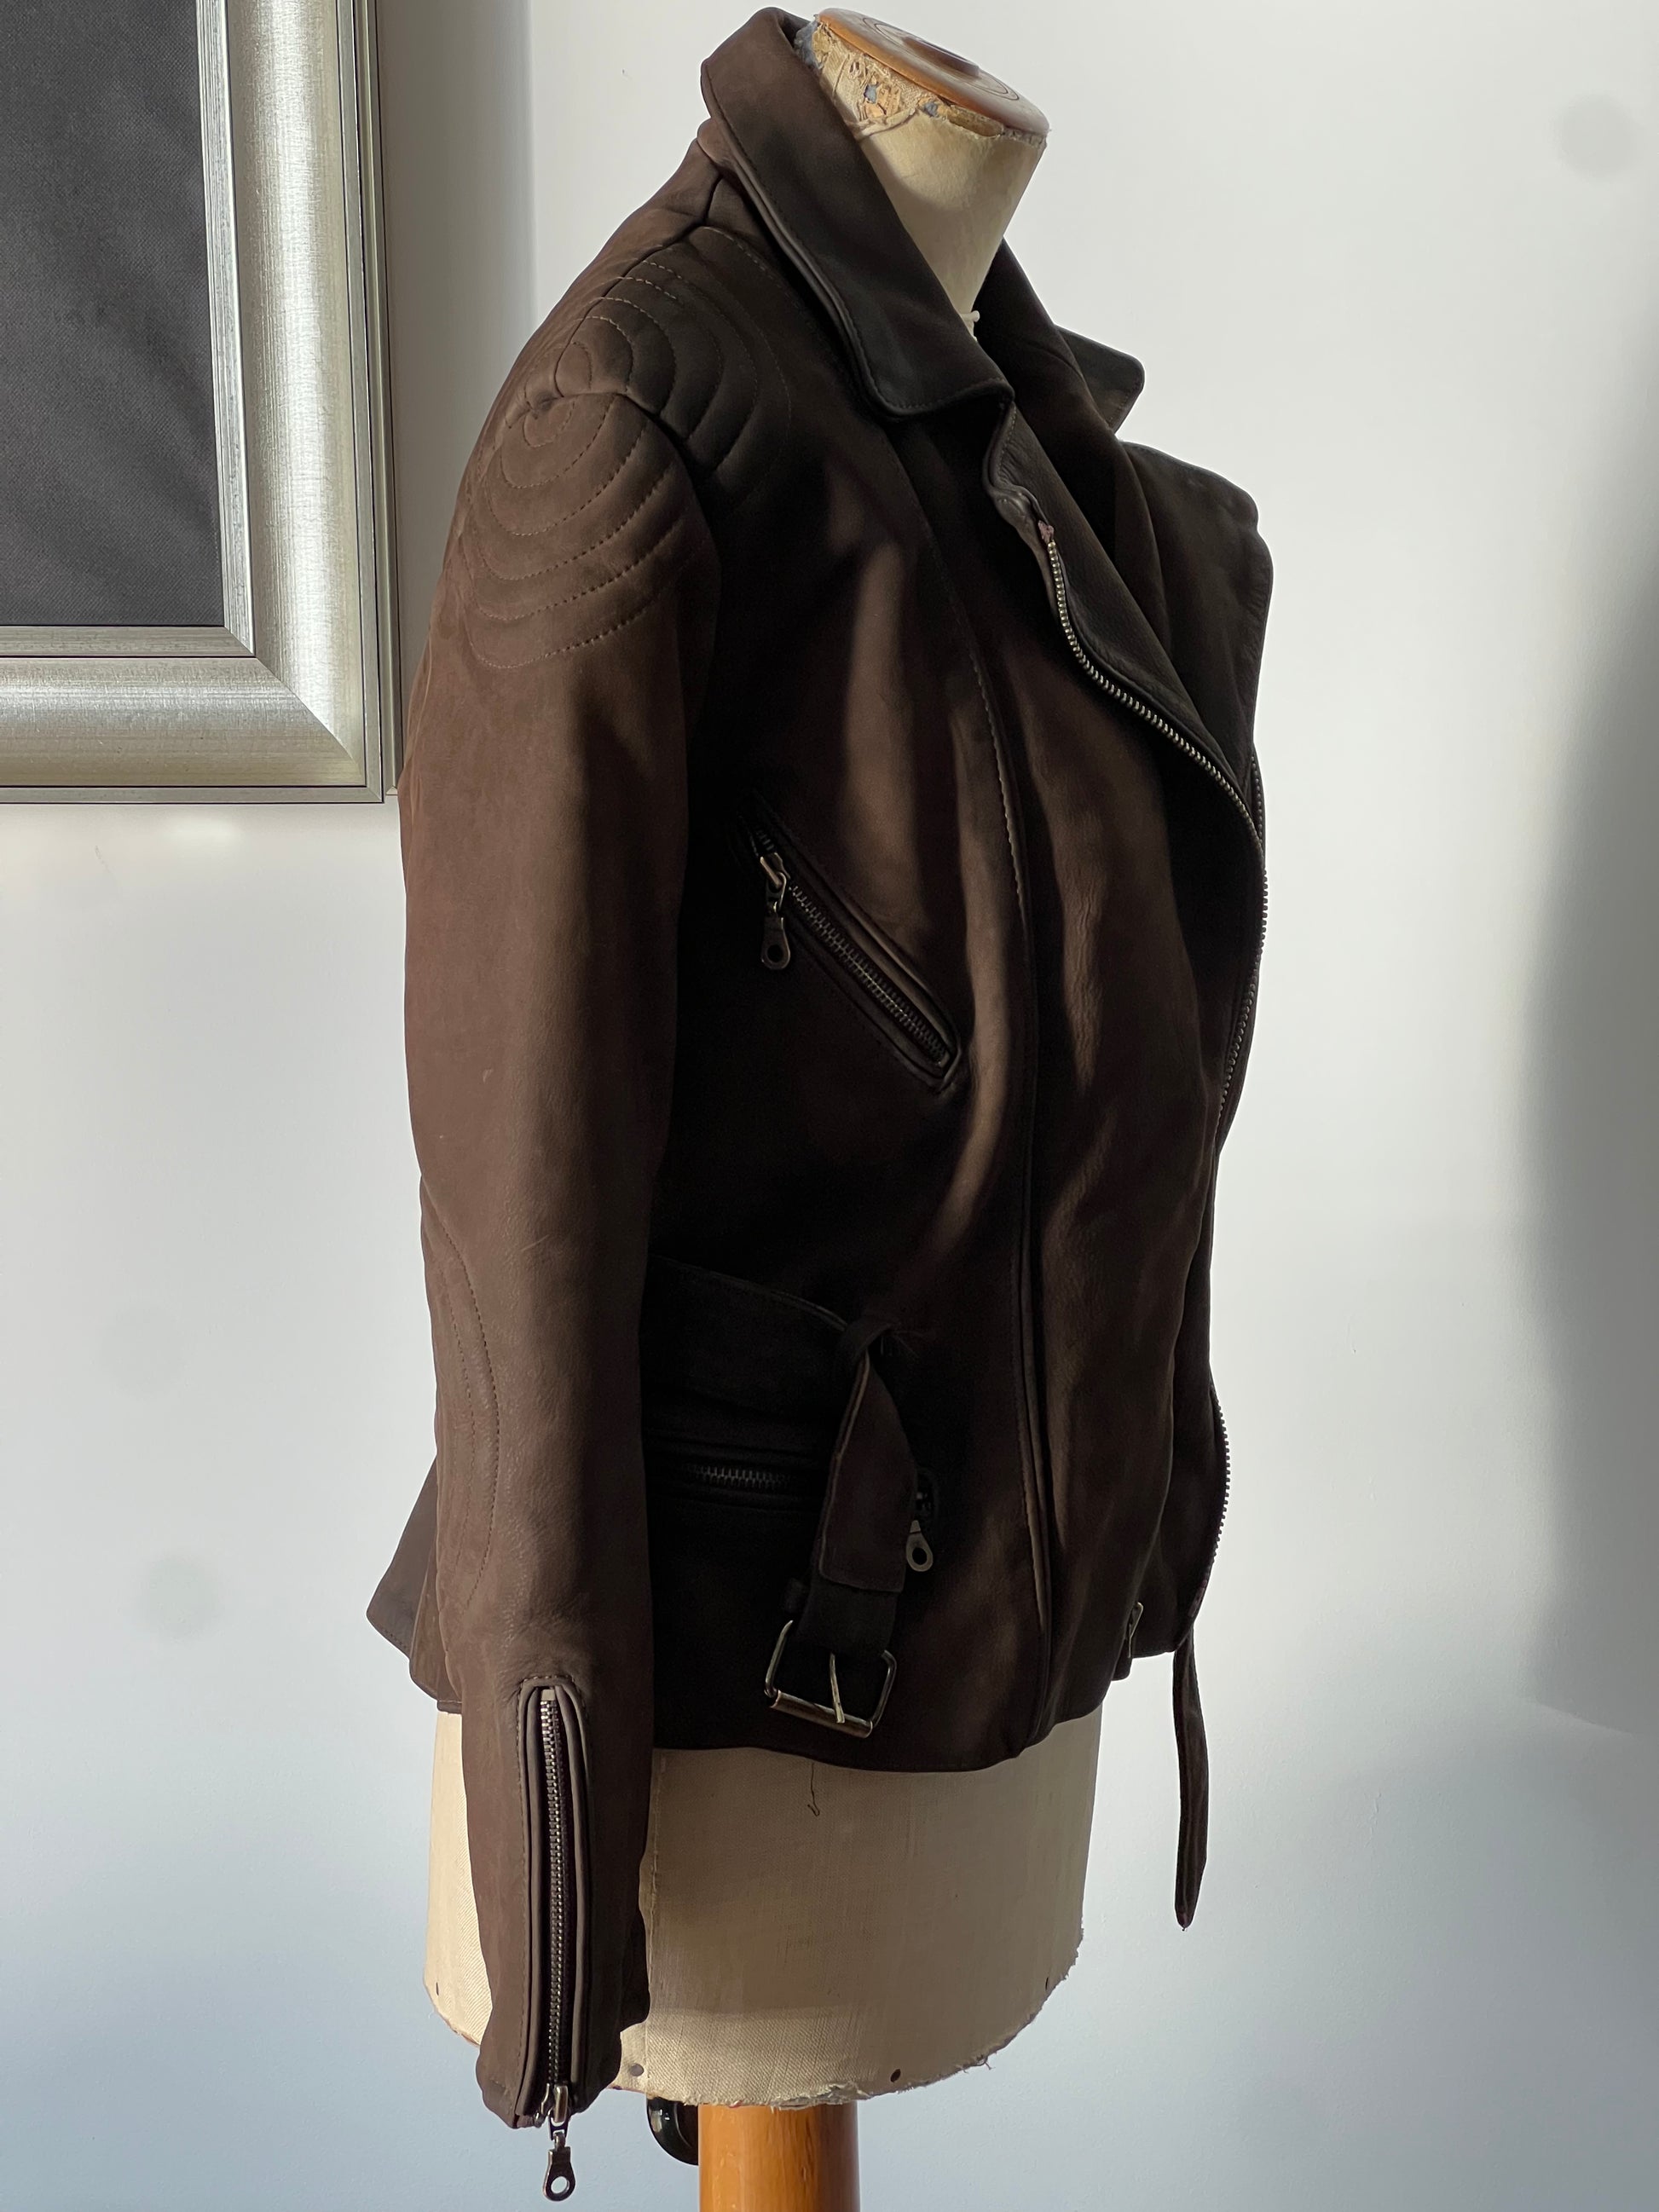 brown suede leather women’s jacket sleeve